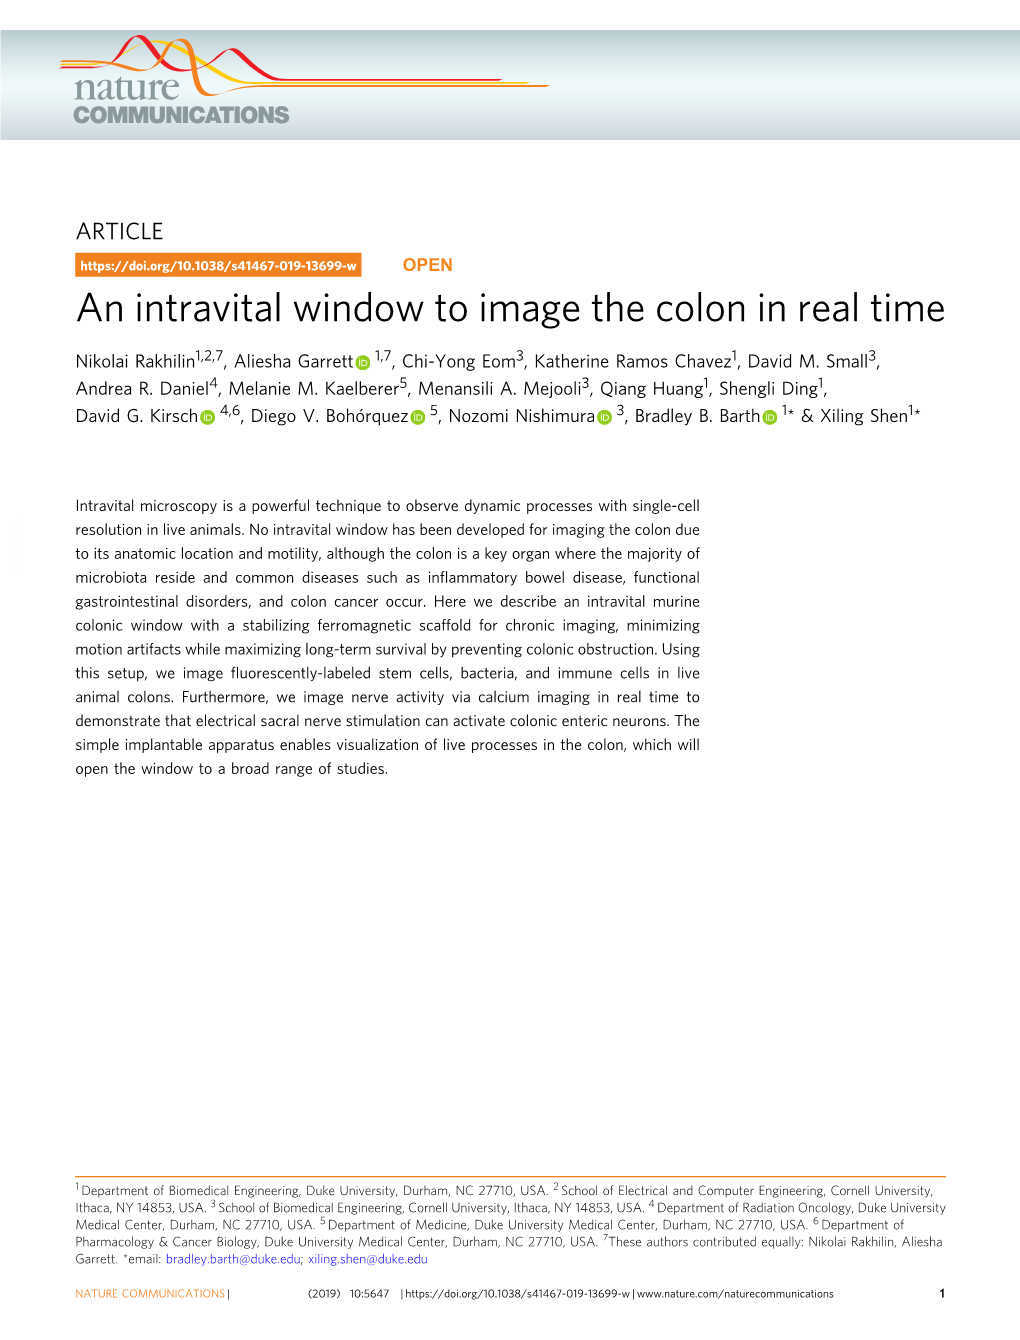 An Intravital Window to Image the Colon in Real Time